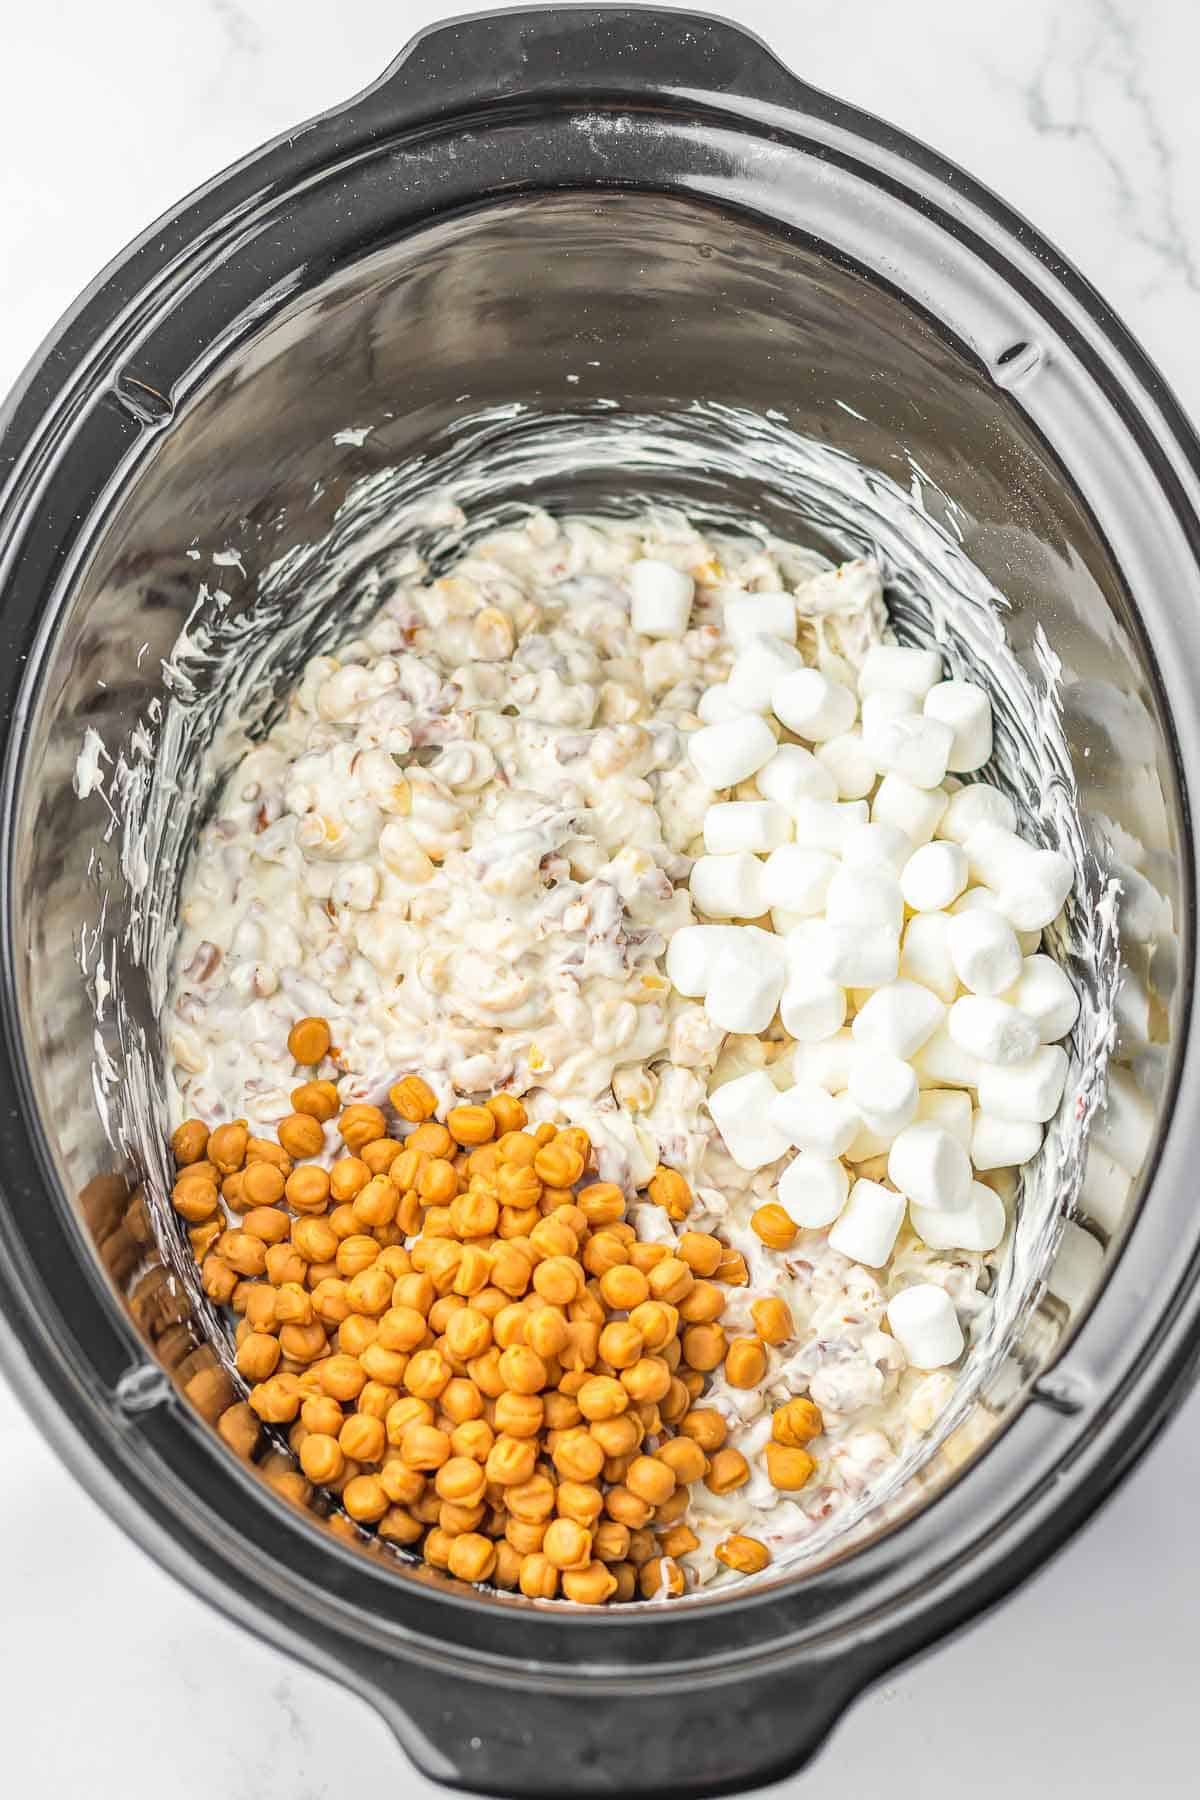 A crock pot filled with a white almond bark, pretzel and peanut mixture with mini marshmallows and caramel bits added in.